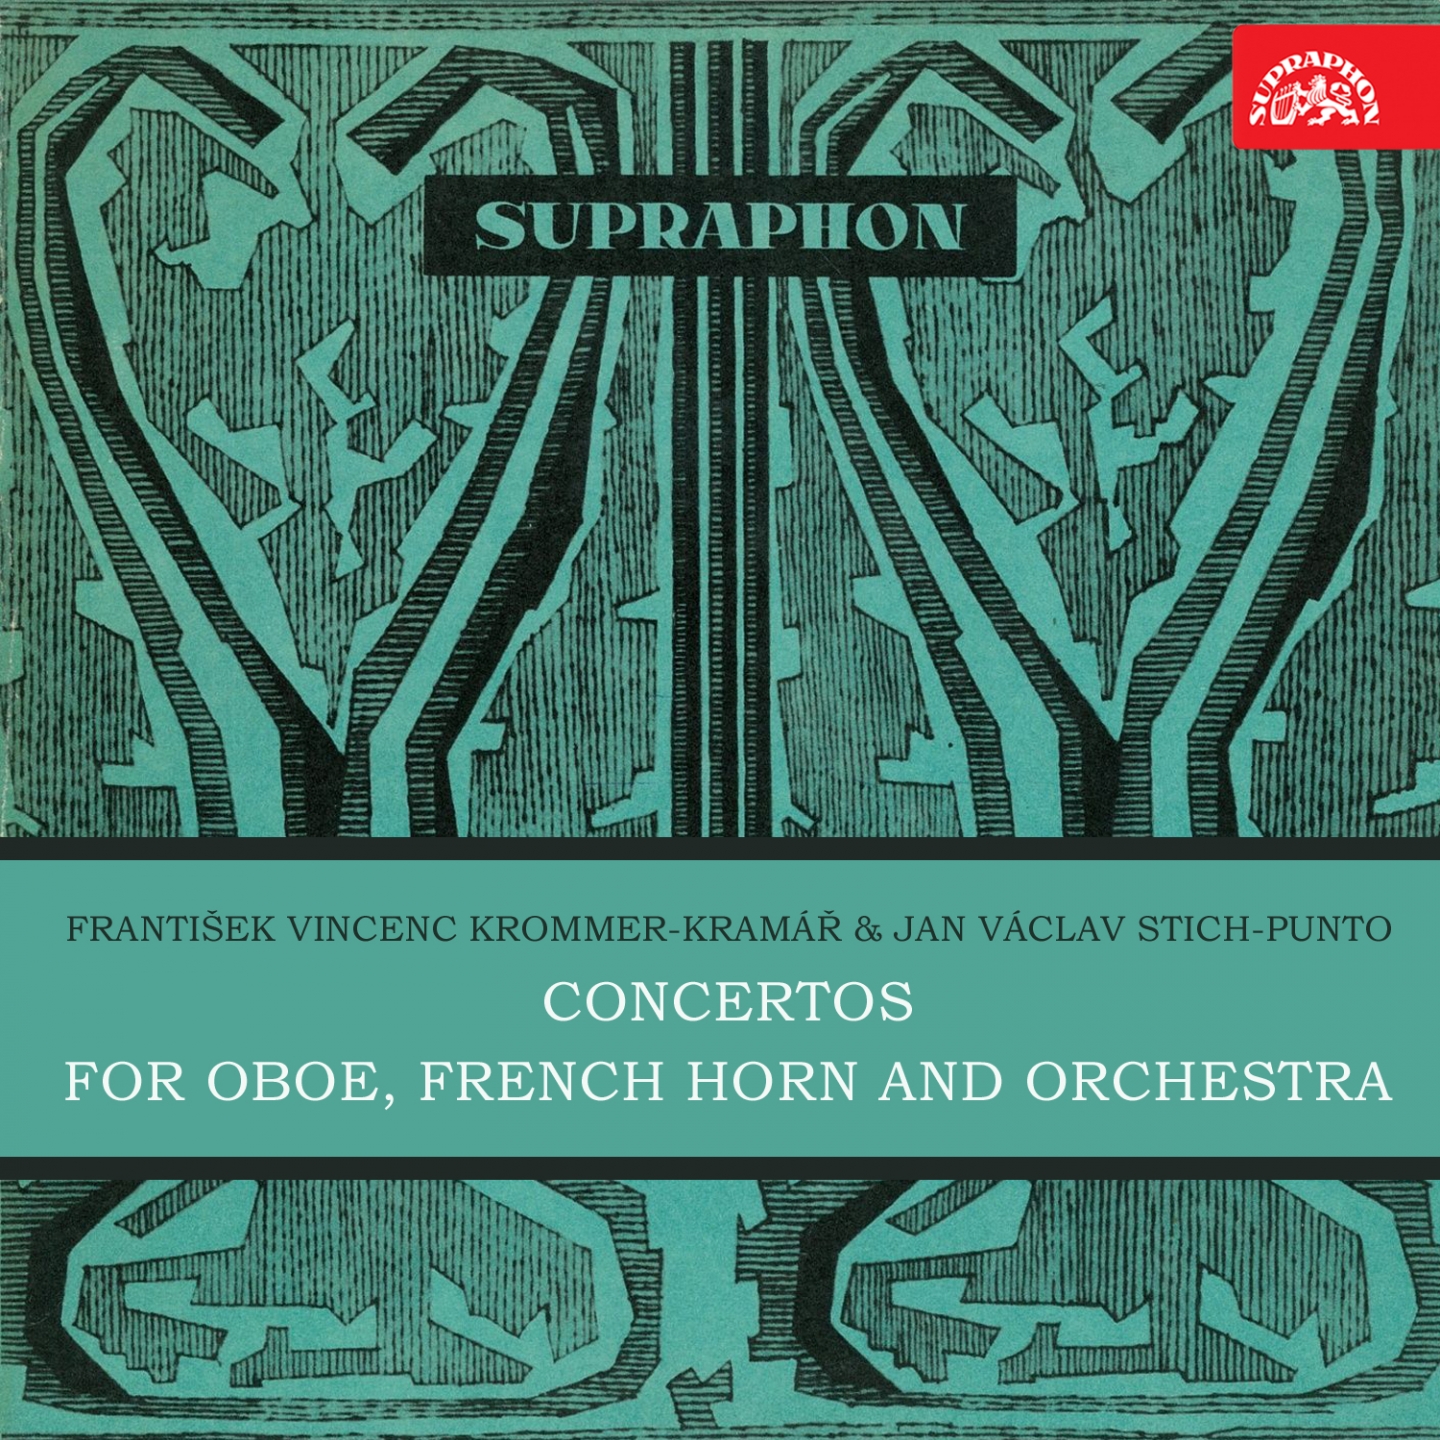 Concerto for French Horn and Orchestra No. 5 in F-Sharp Major, Op. 52, .: IV. Rondo. Allegro